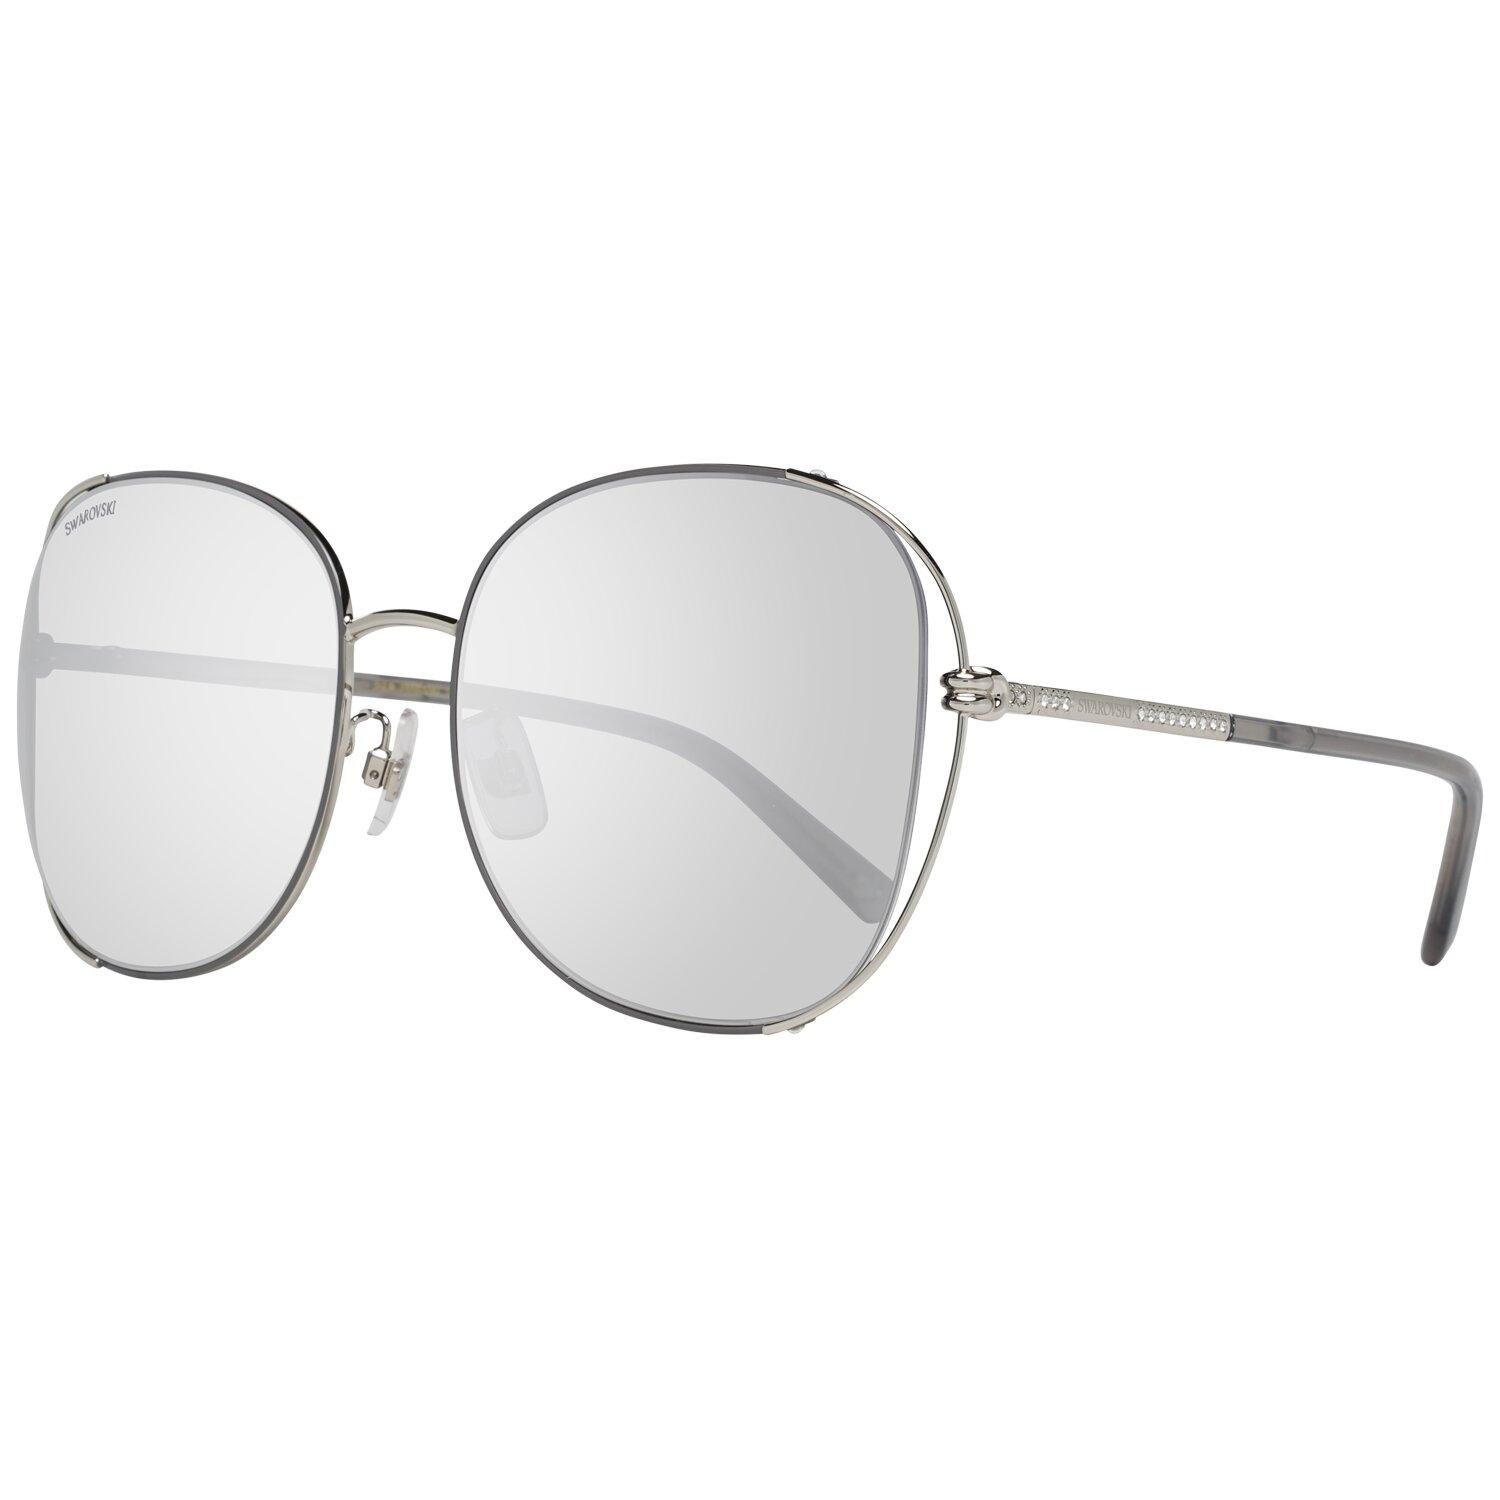 DetailsMATERIAL: MetalCOLOR: GreyMODEL: SK0248-K 6016CGENDER: WomenCOUNTRY OF MANUFACTURE: ChinaTYPE: SunglassesORIGINAL CASE?: YesSTYLE: OvalOCCASION: CasualFEATURES: LightweightLENS COLOR: GreyLENS TECHNOLOGY: MirroredYEAR MANUFACTURED: